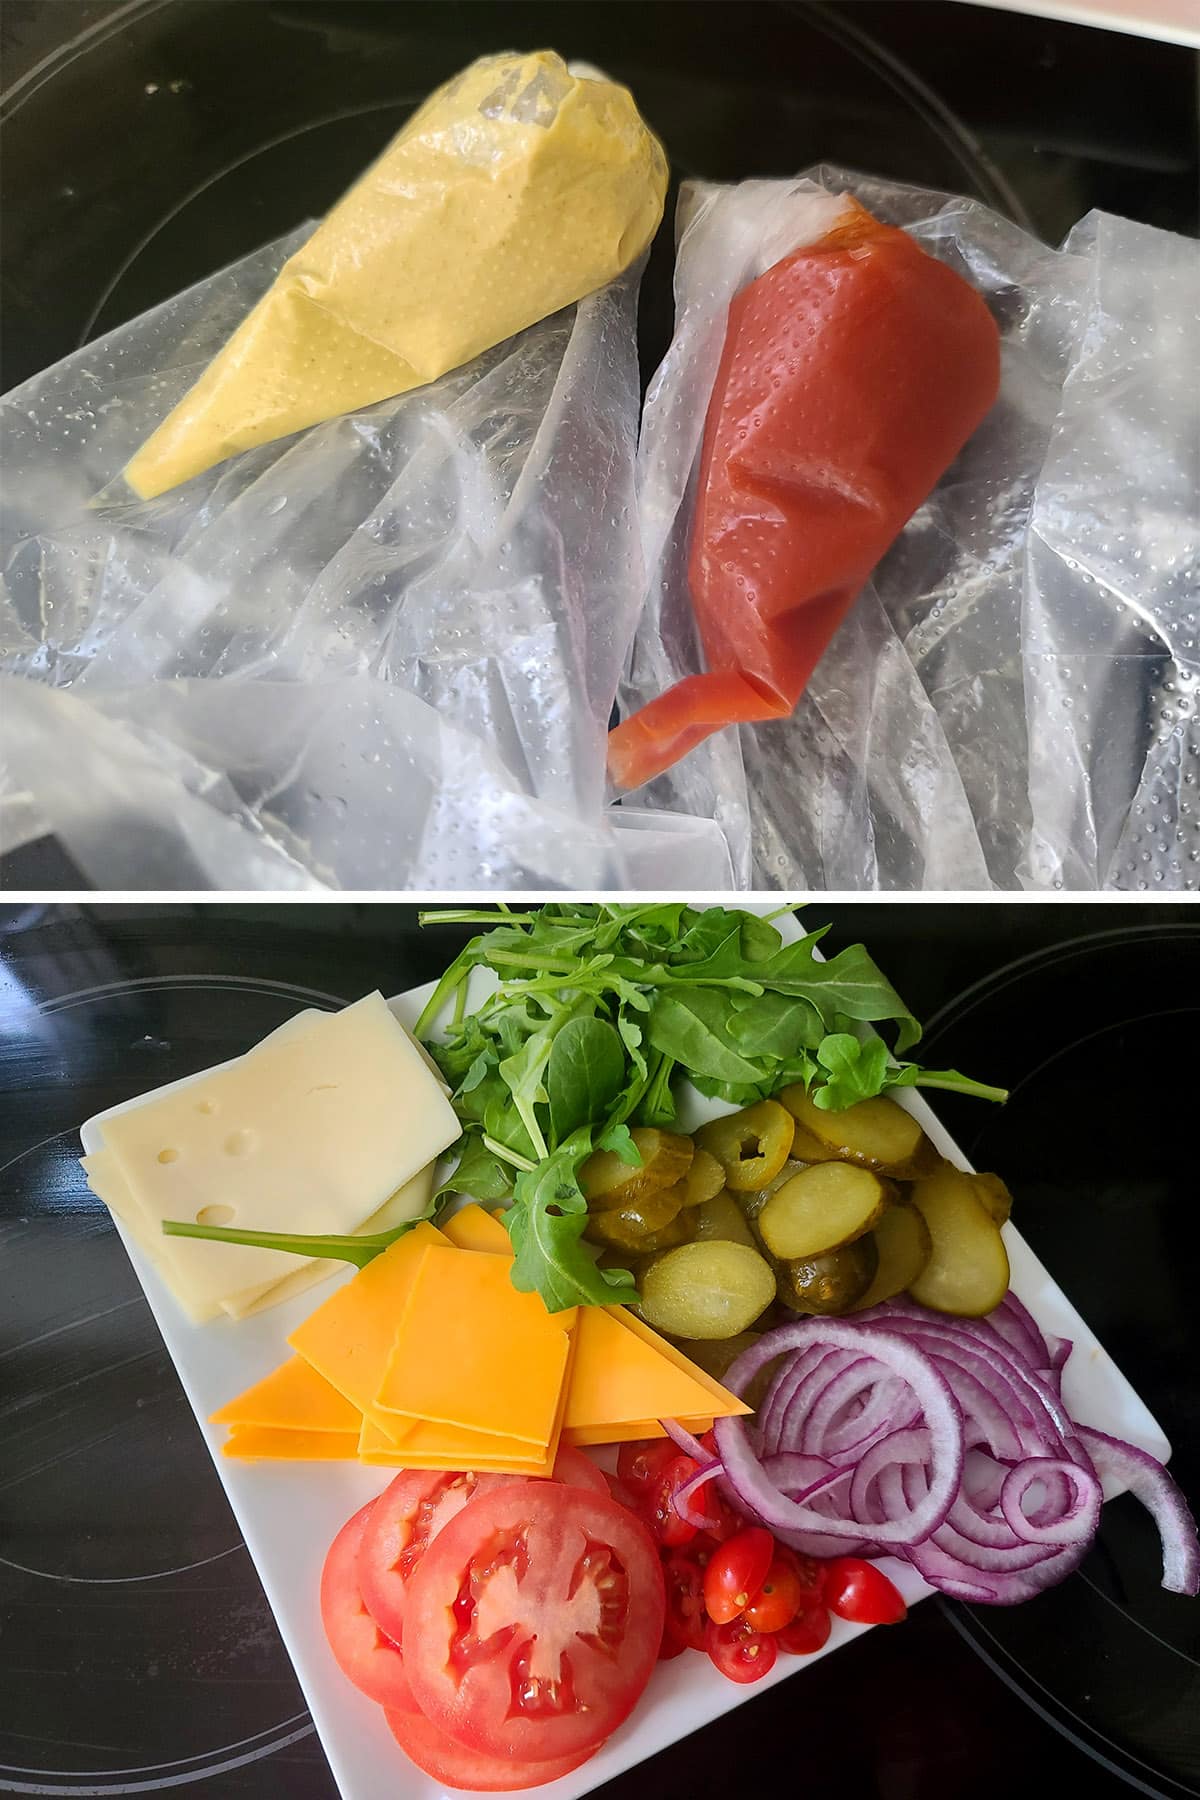 A 2 part image showing ketchup and mustard in pastry bags, and a plate of prepared burger toppings.